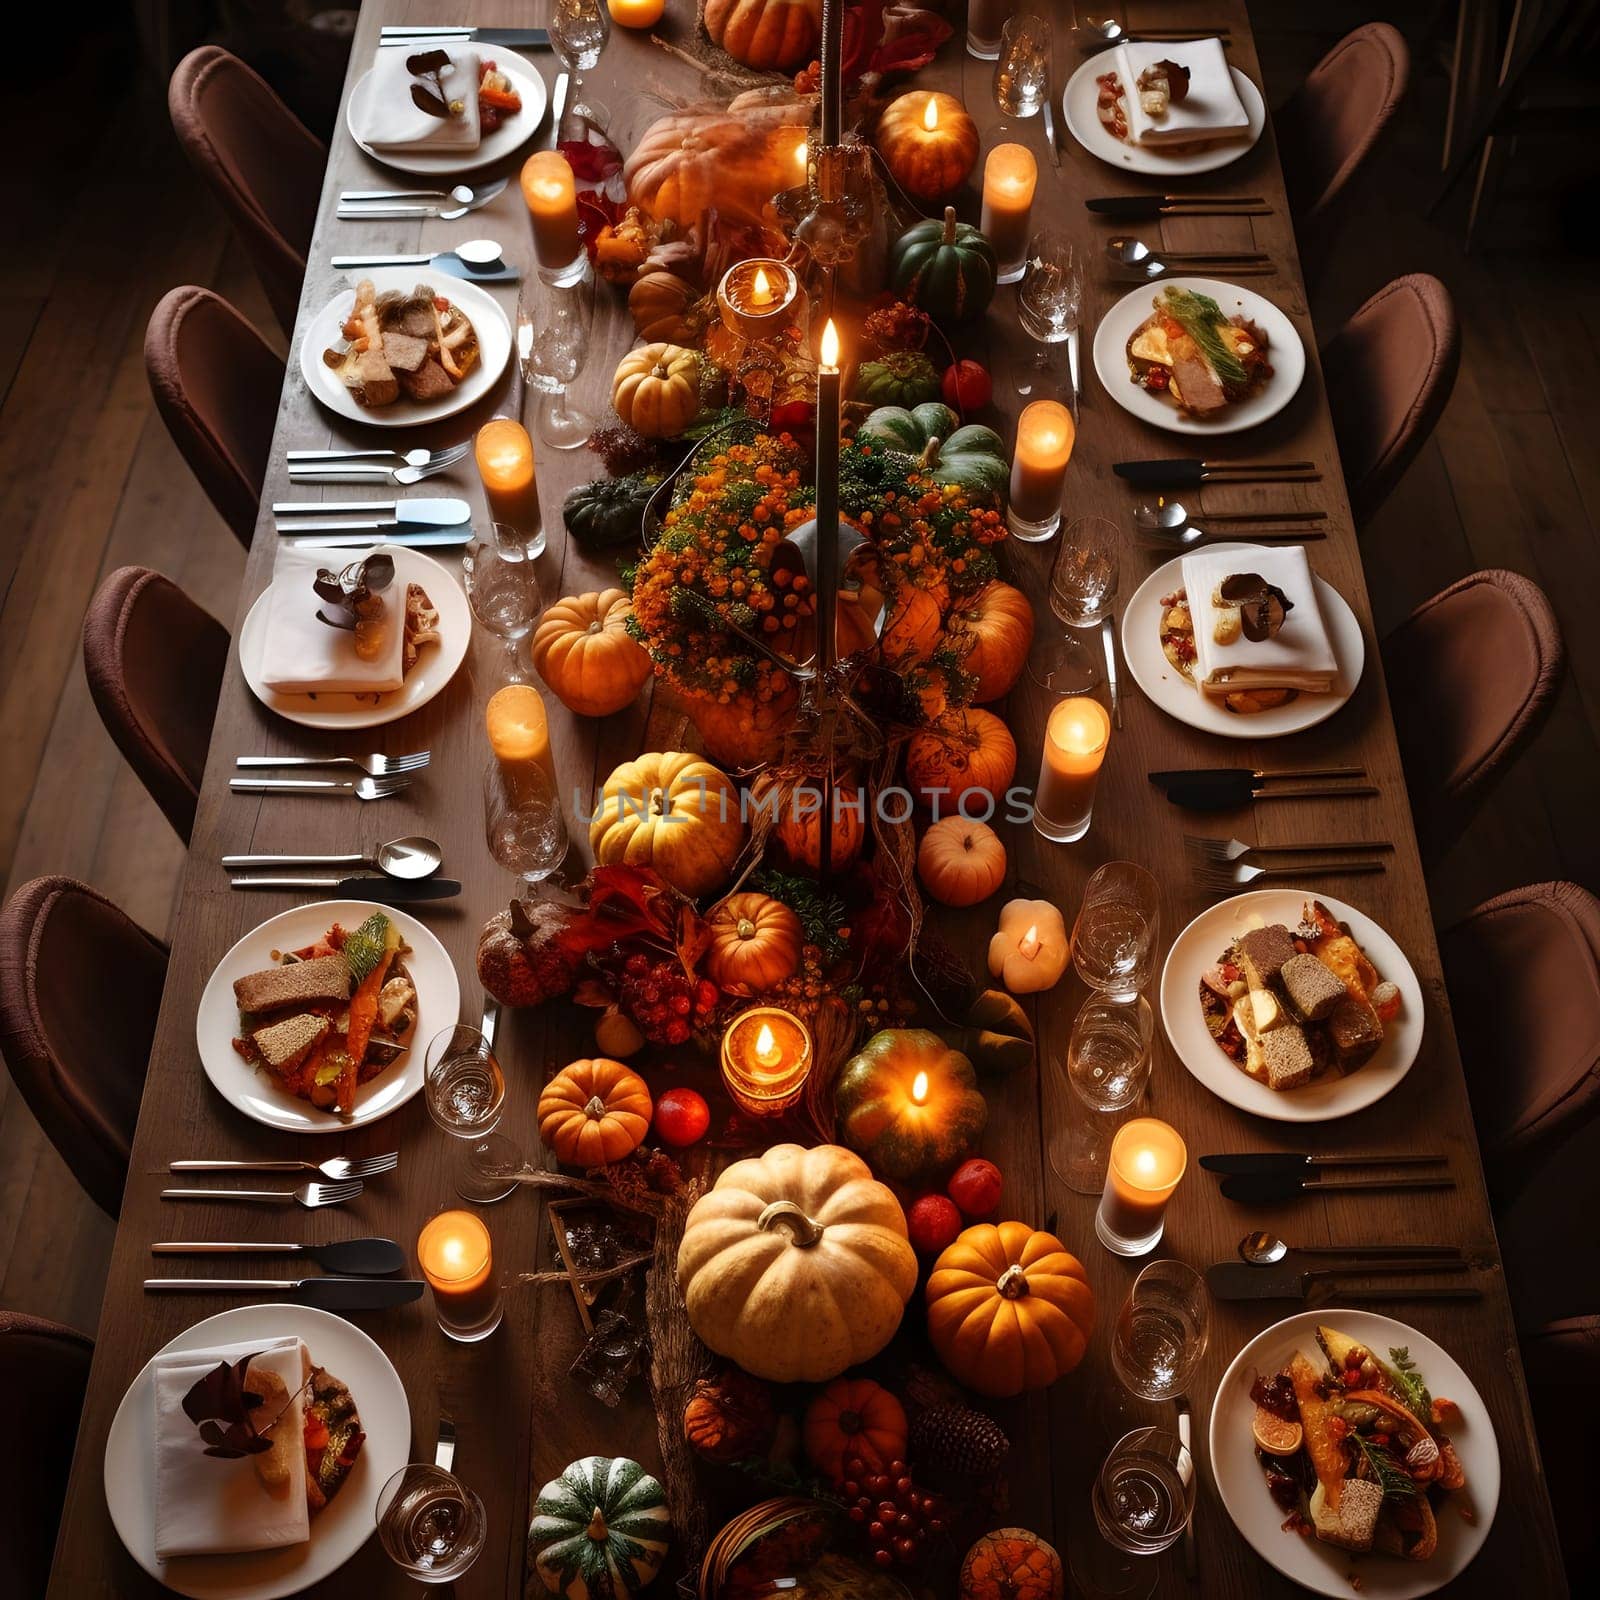 Top view of an elegantly set table, plates, cutlery, pumpkin candles, glasses. Pumpkin as a dish of thanksgiving for the harvest. An atmosphere of joy and celebration.